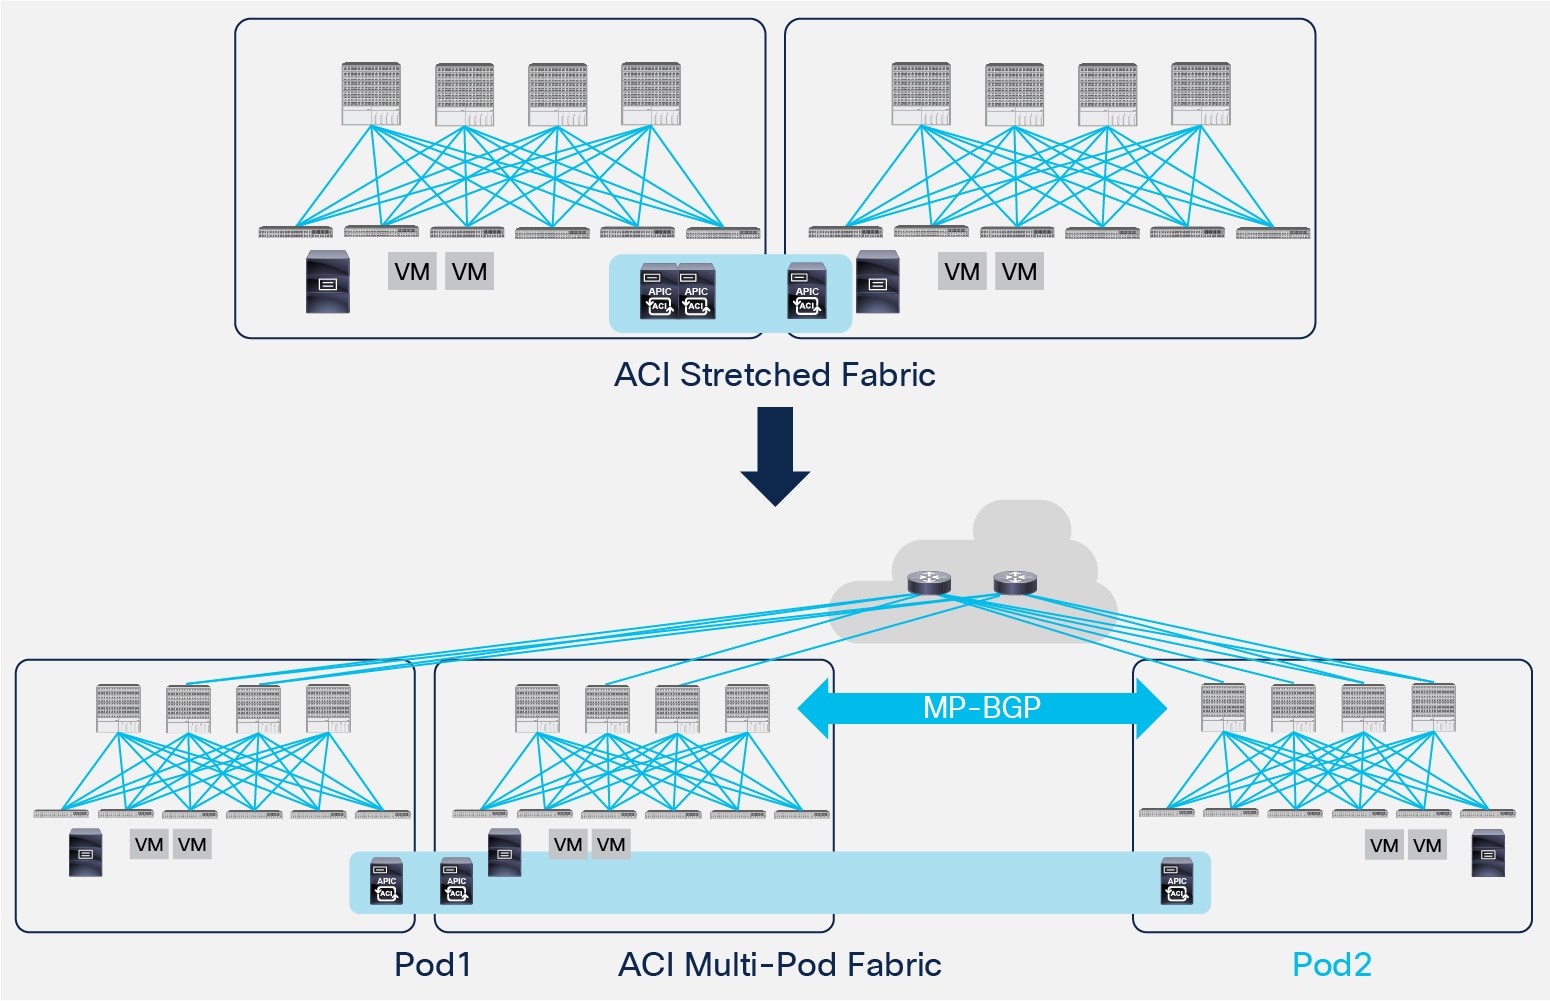 Migrating from ACI Stretched Fabric to ACI Multi-Pod